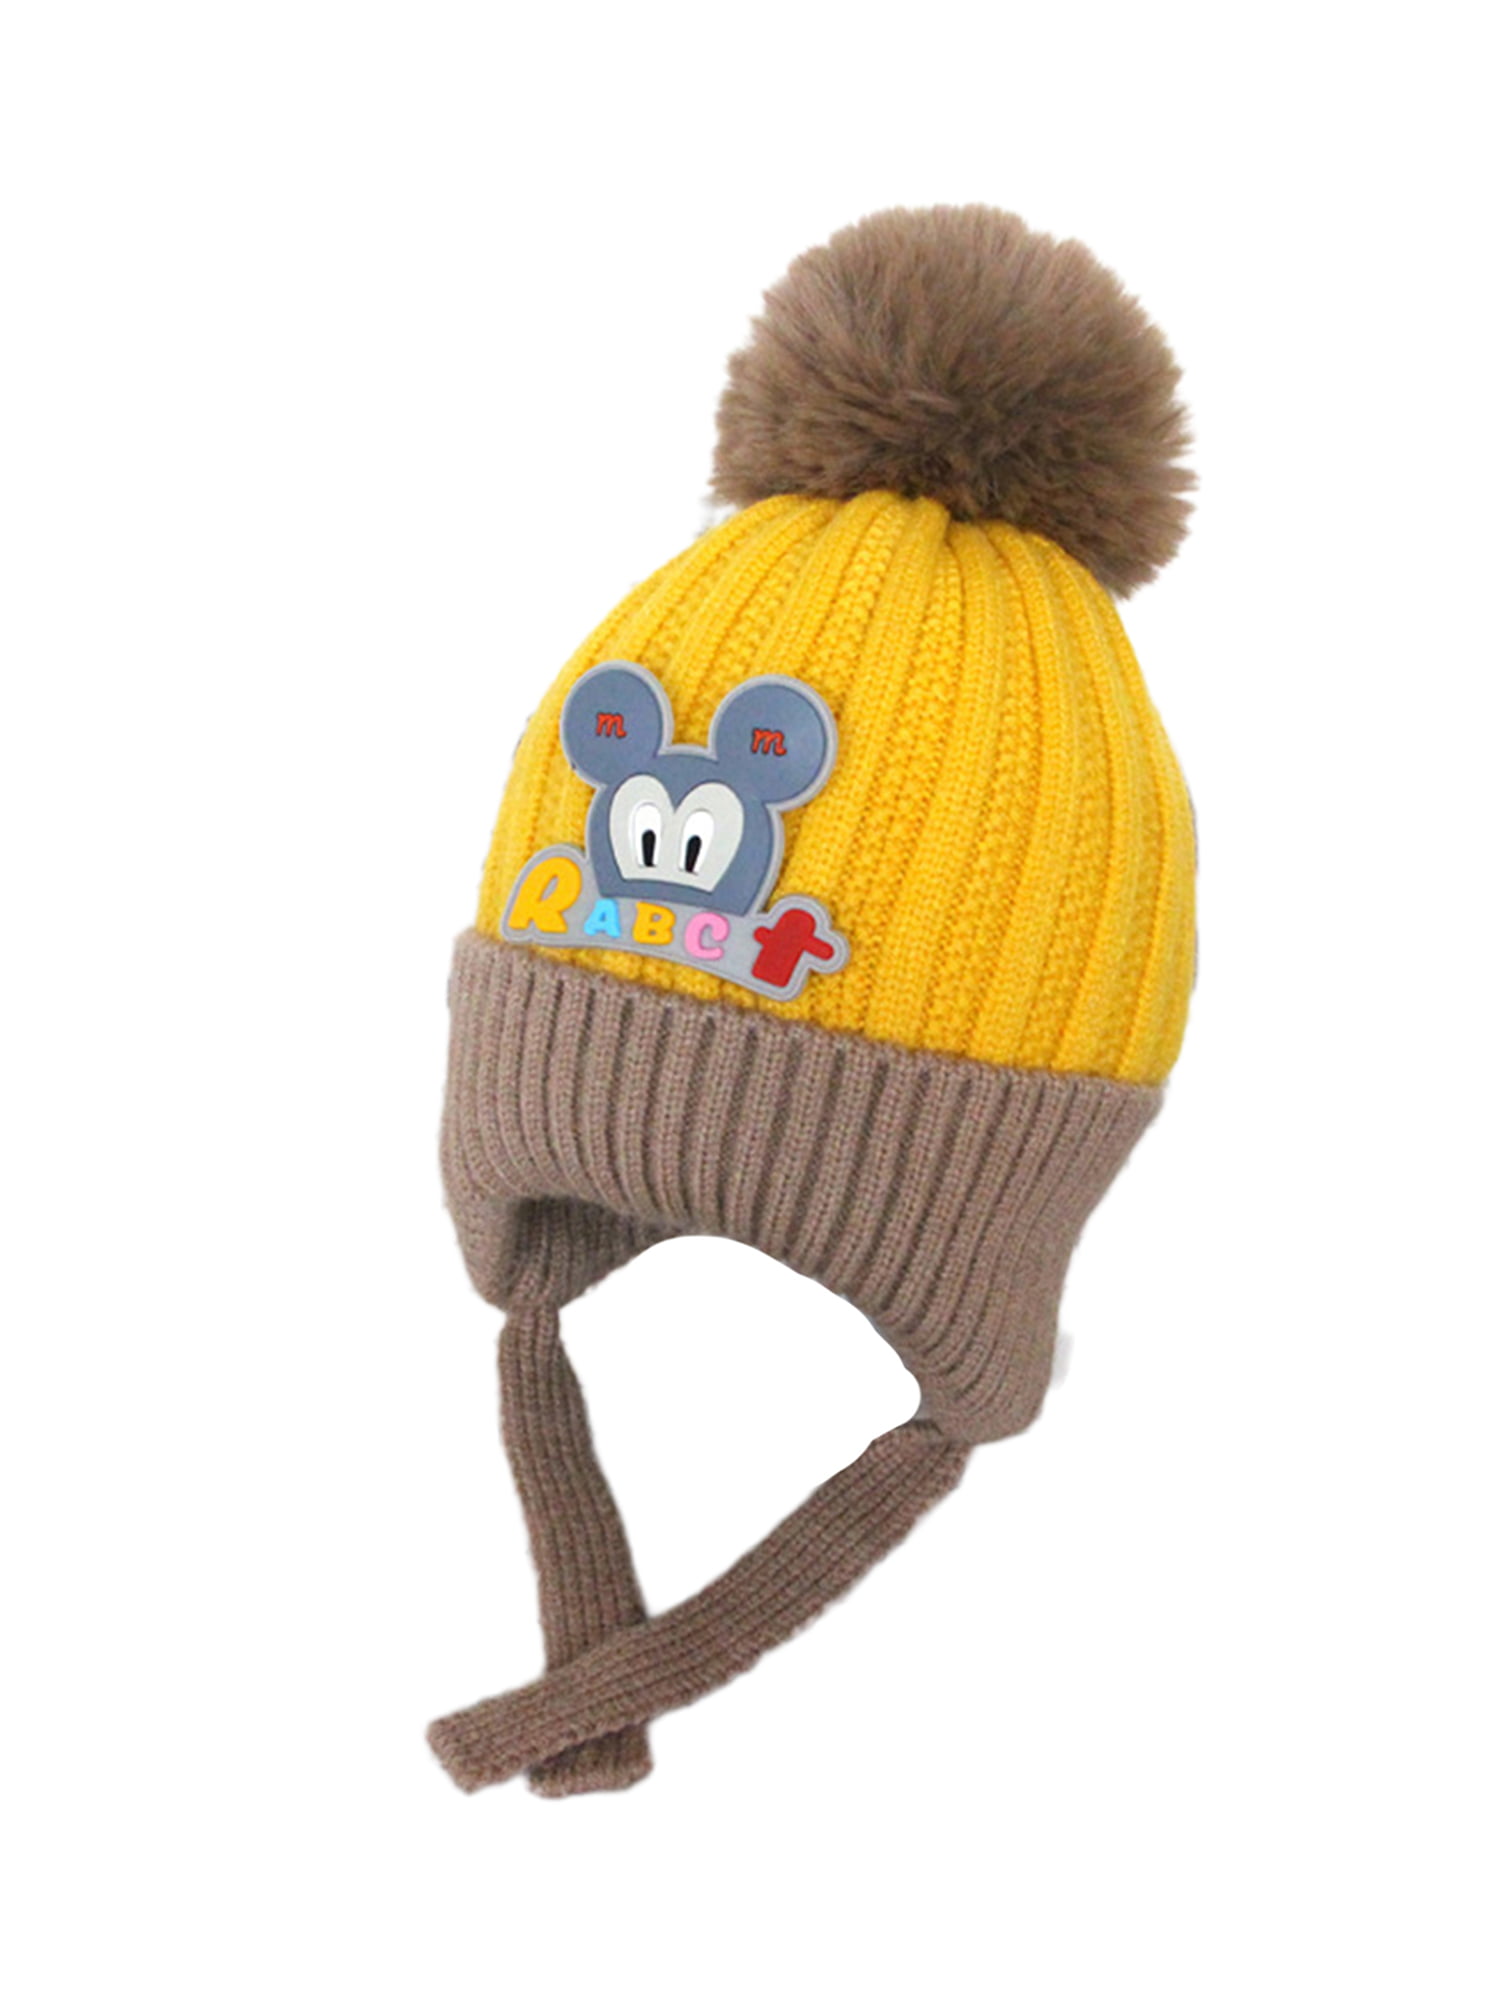 Kids winter hat with pom-pom Toddler winter hat for boys & girls with koalas Baby beanie with ear flaps Child ear flap knit hat